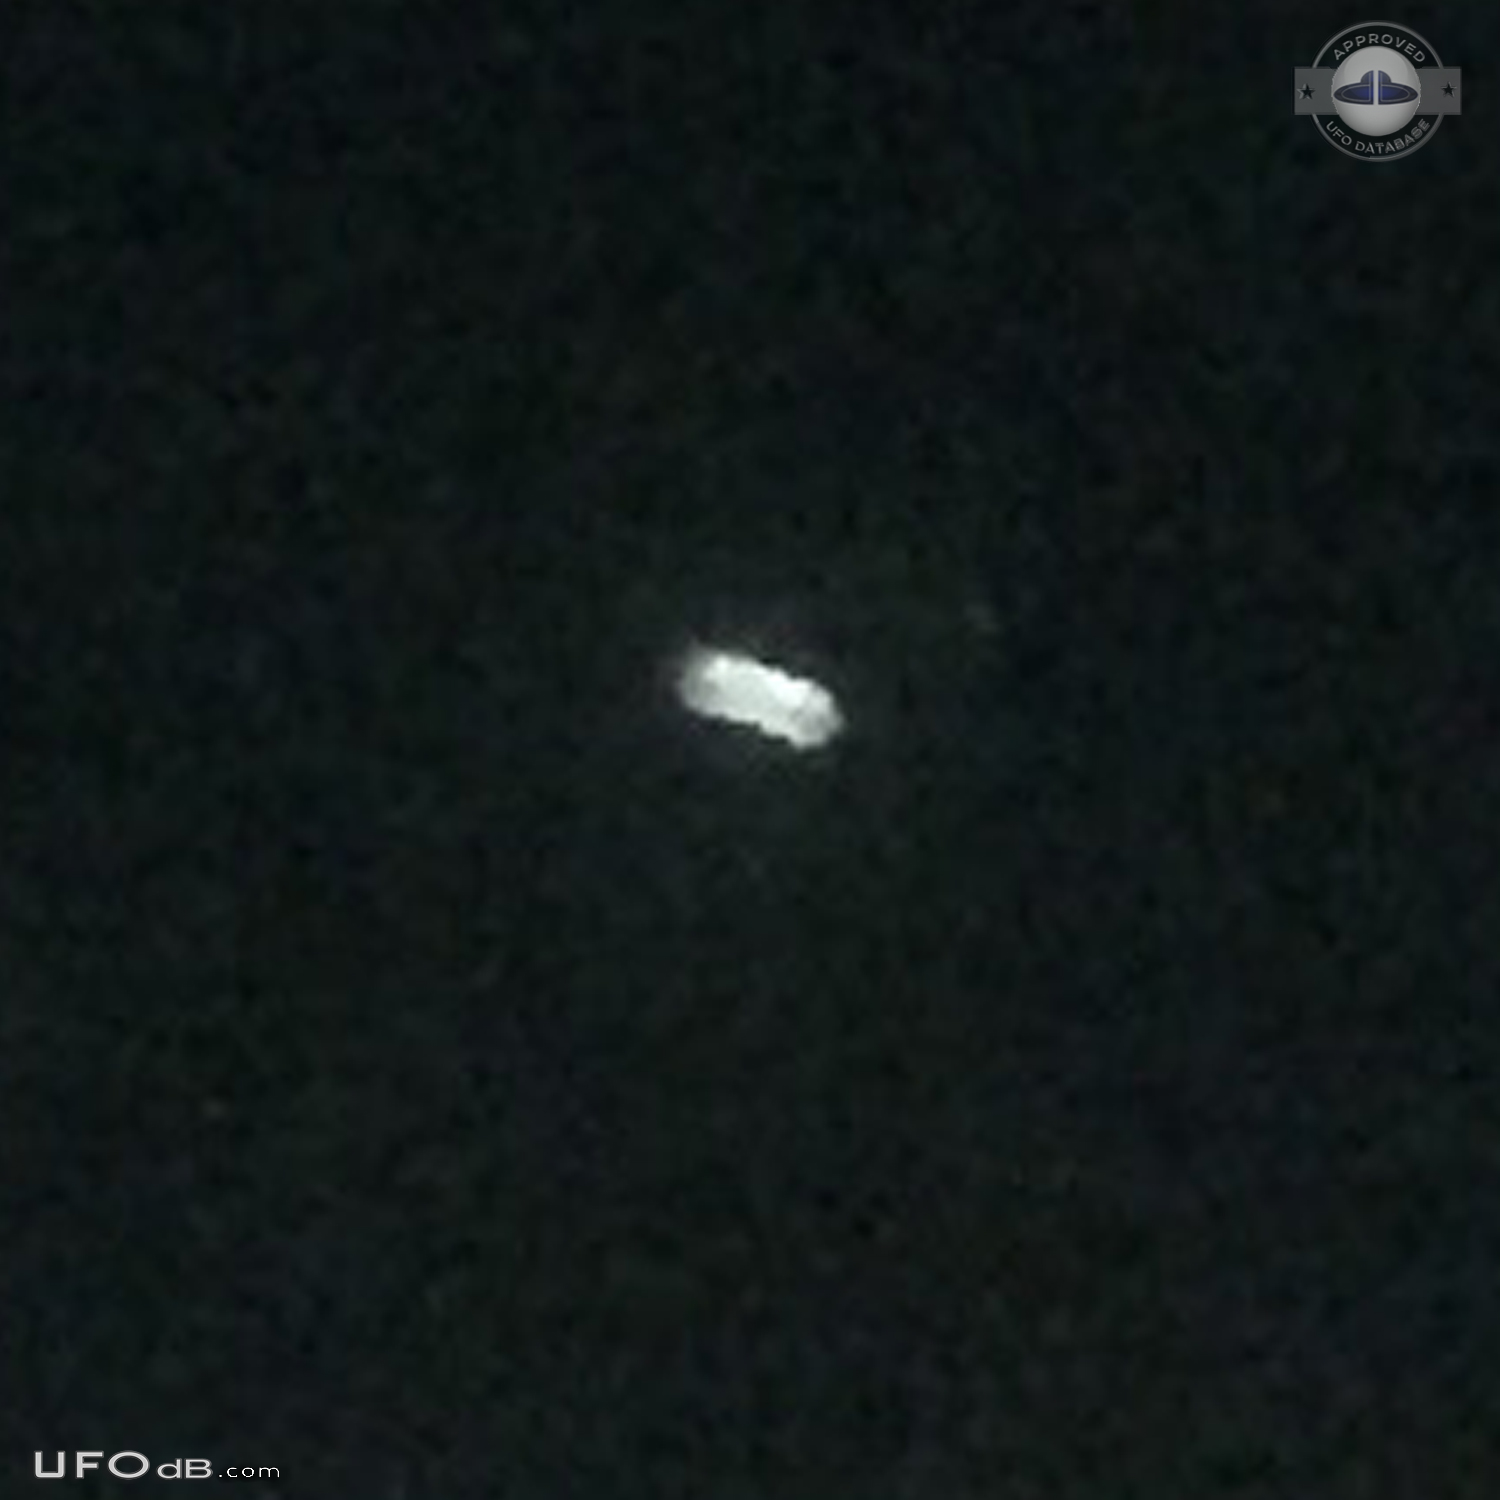 Very bright UFO seemed to have tentacles - Bangkok Thailand 2017 UFO Picture #805-6